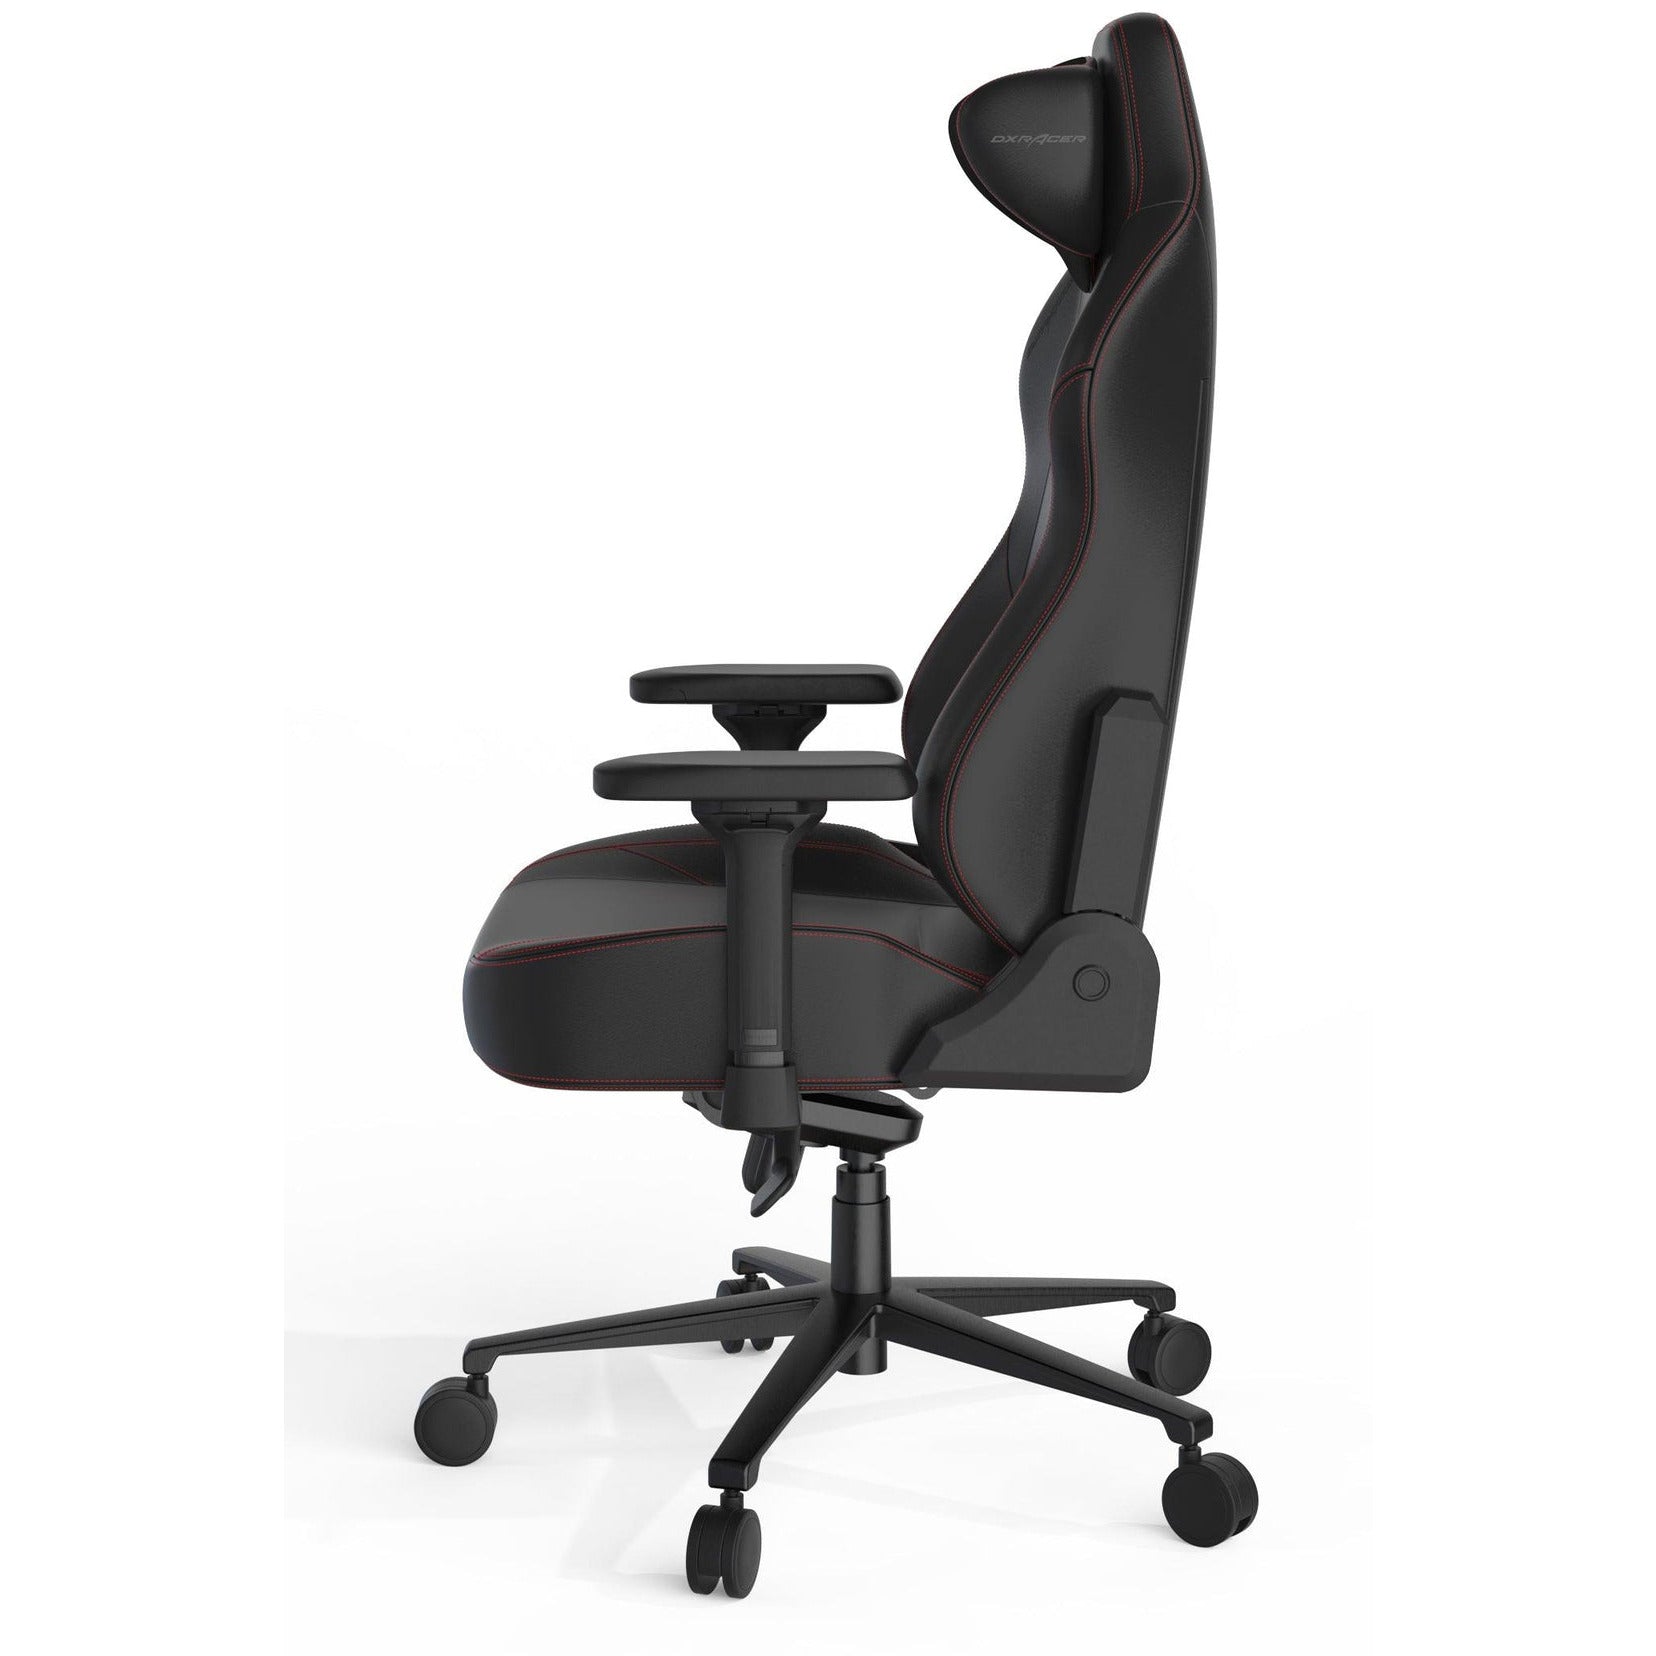 DXRacer Craft D5000 Red and Black Gaming Chair